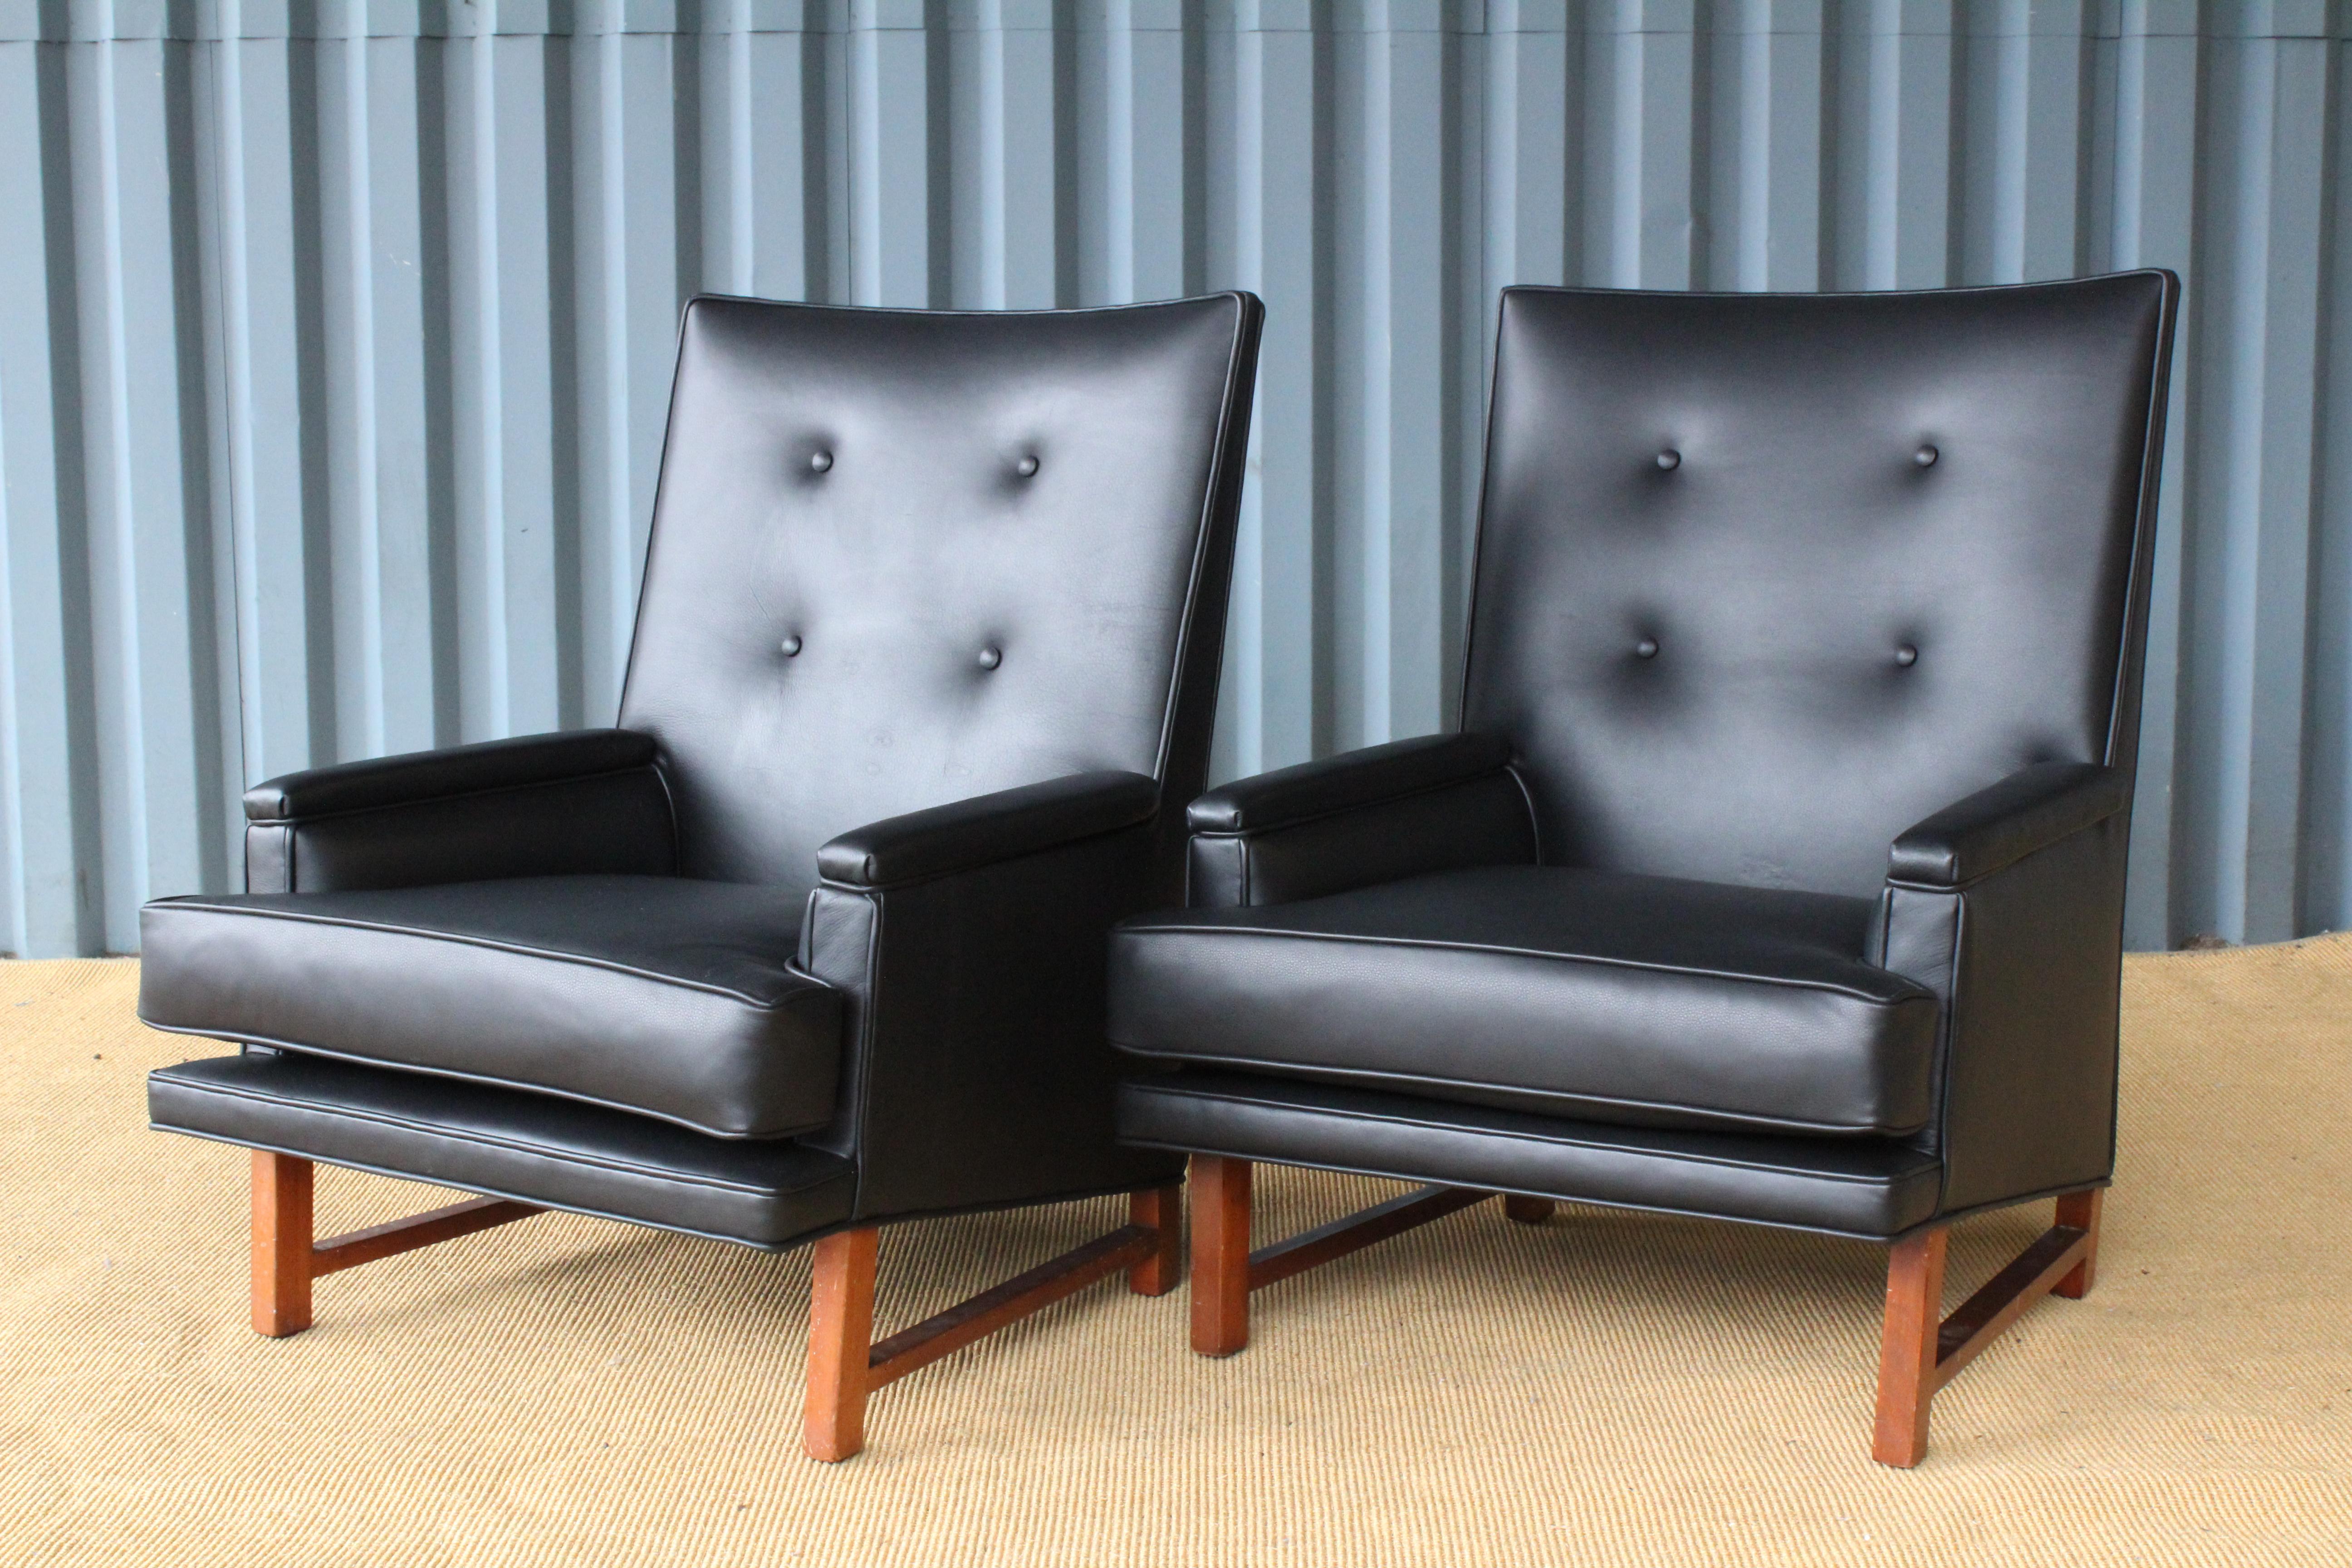 Pair of high back lounge chairs designed by Edward Wormley for Dunbar, USA, 1950s. The pair have new black leather upholstery. Sold as a pair.